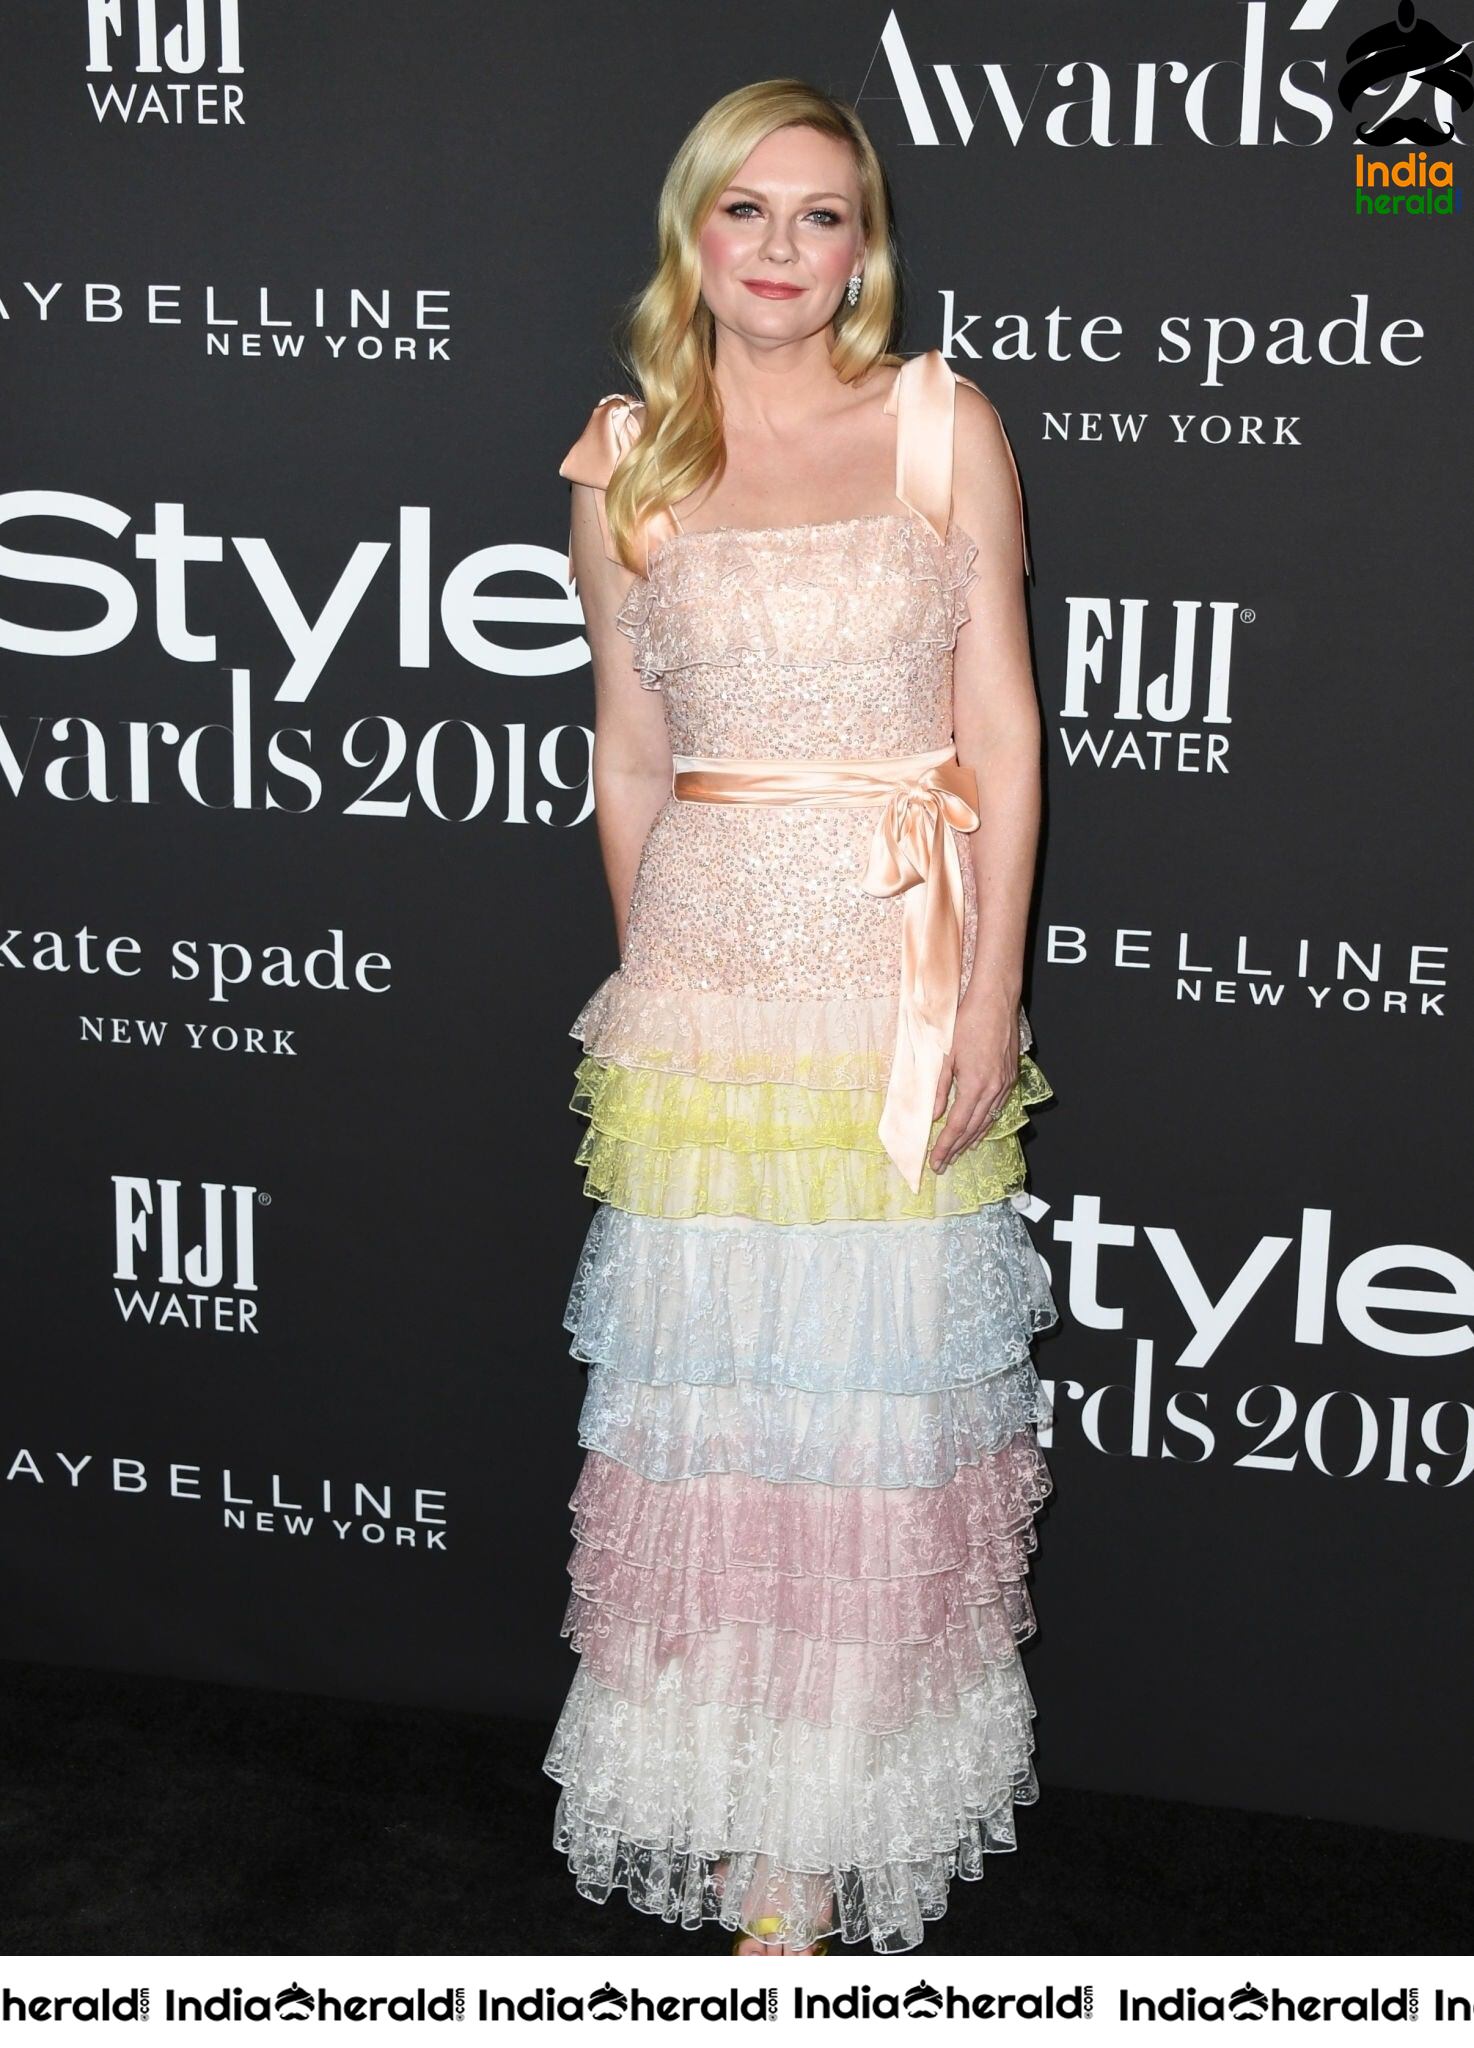 Kirsten Dunst at 5th Annual Instyle Awards in Los Angeles Set 2